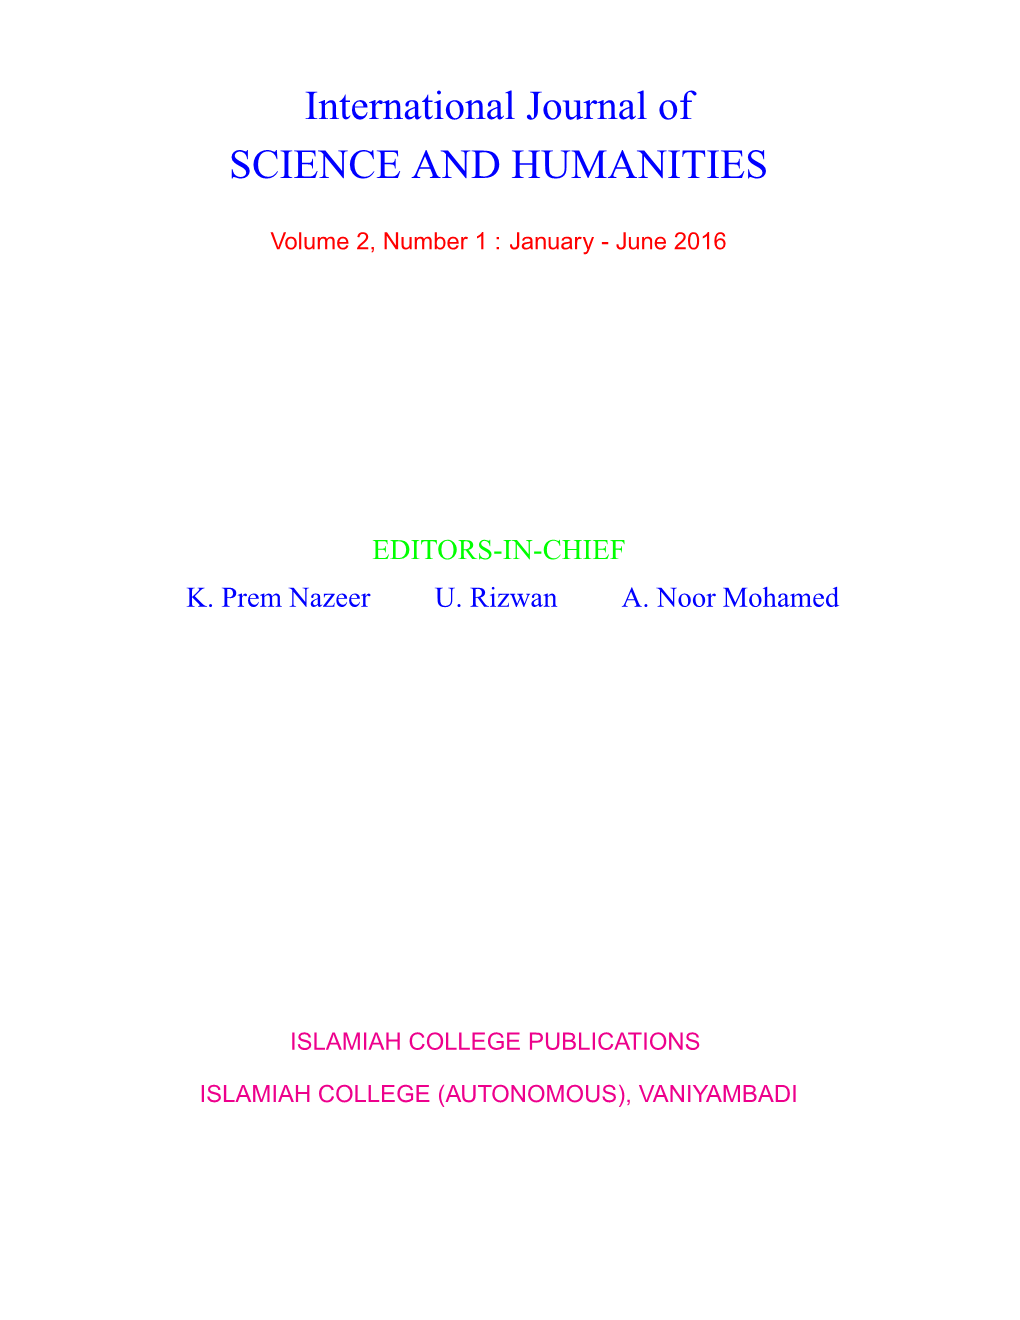 International Journal of SCIENCE and HUMANITIES